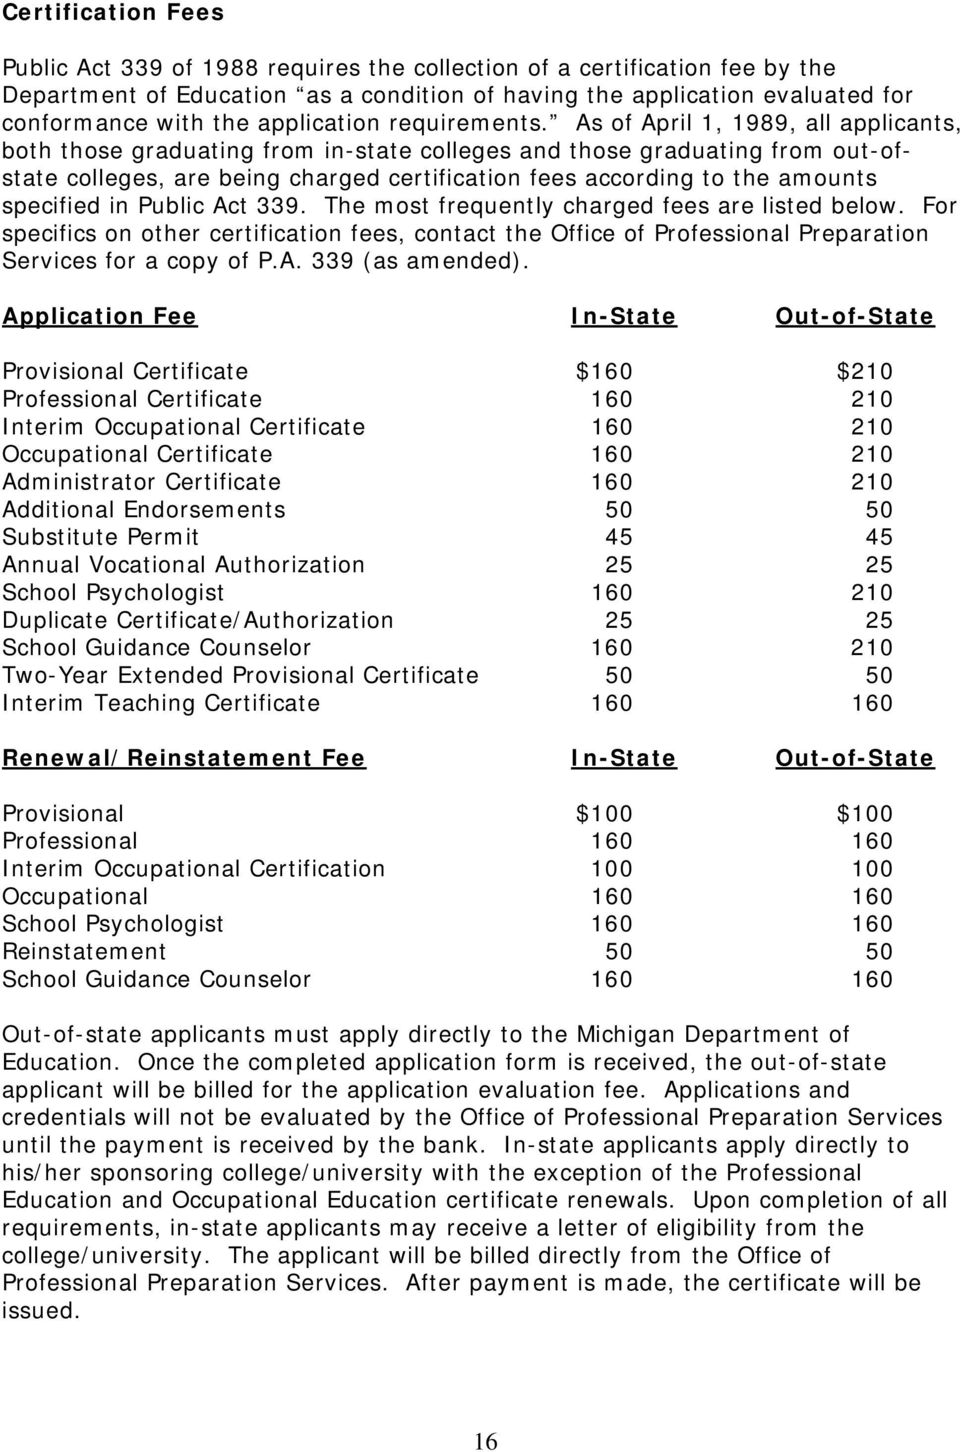 As of April 1, 1989, all applicants, both those graduating from in-state colleges and those graduating from out-ofstate colleges, are being charged certification fees according to the amounts